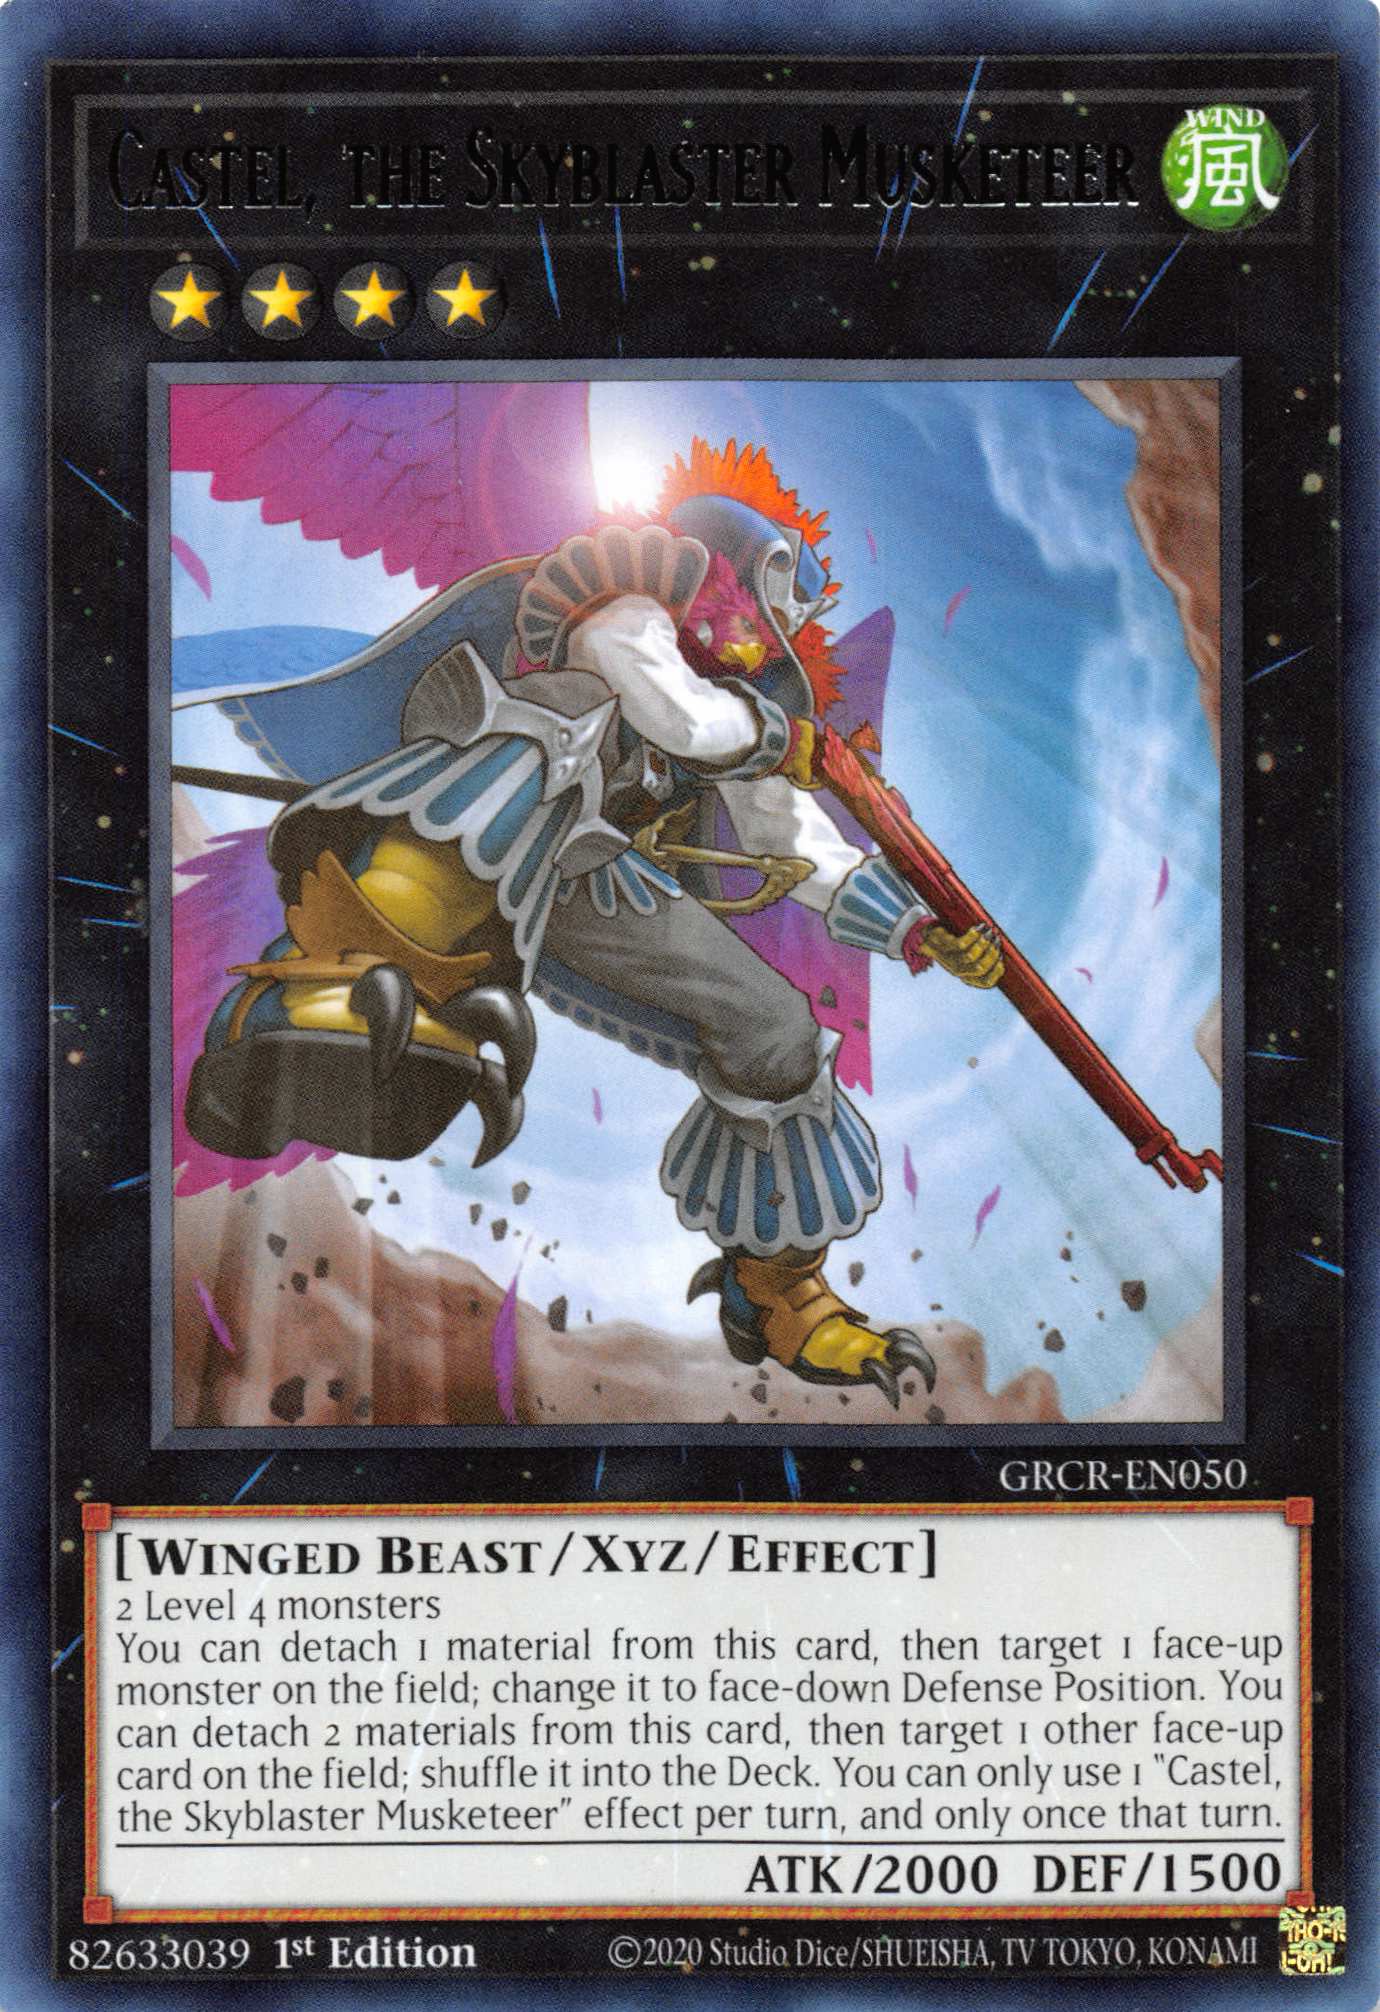 Castel, the Skyblaster Musketeer [GRCR-EN050] Rare | Anubis Games and Hobby